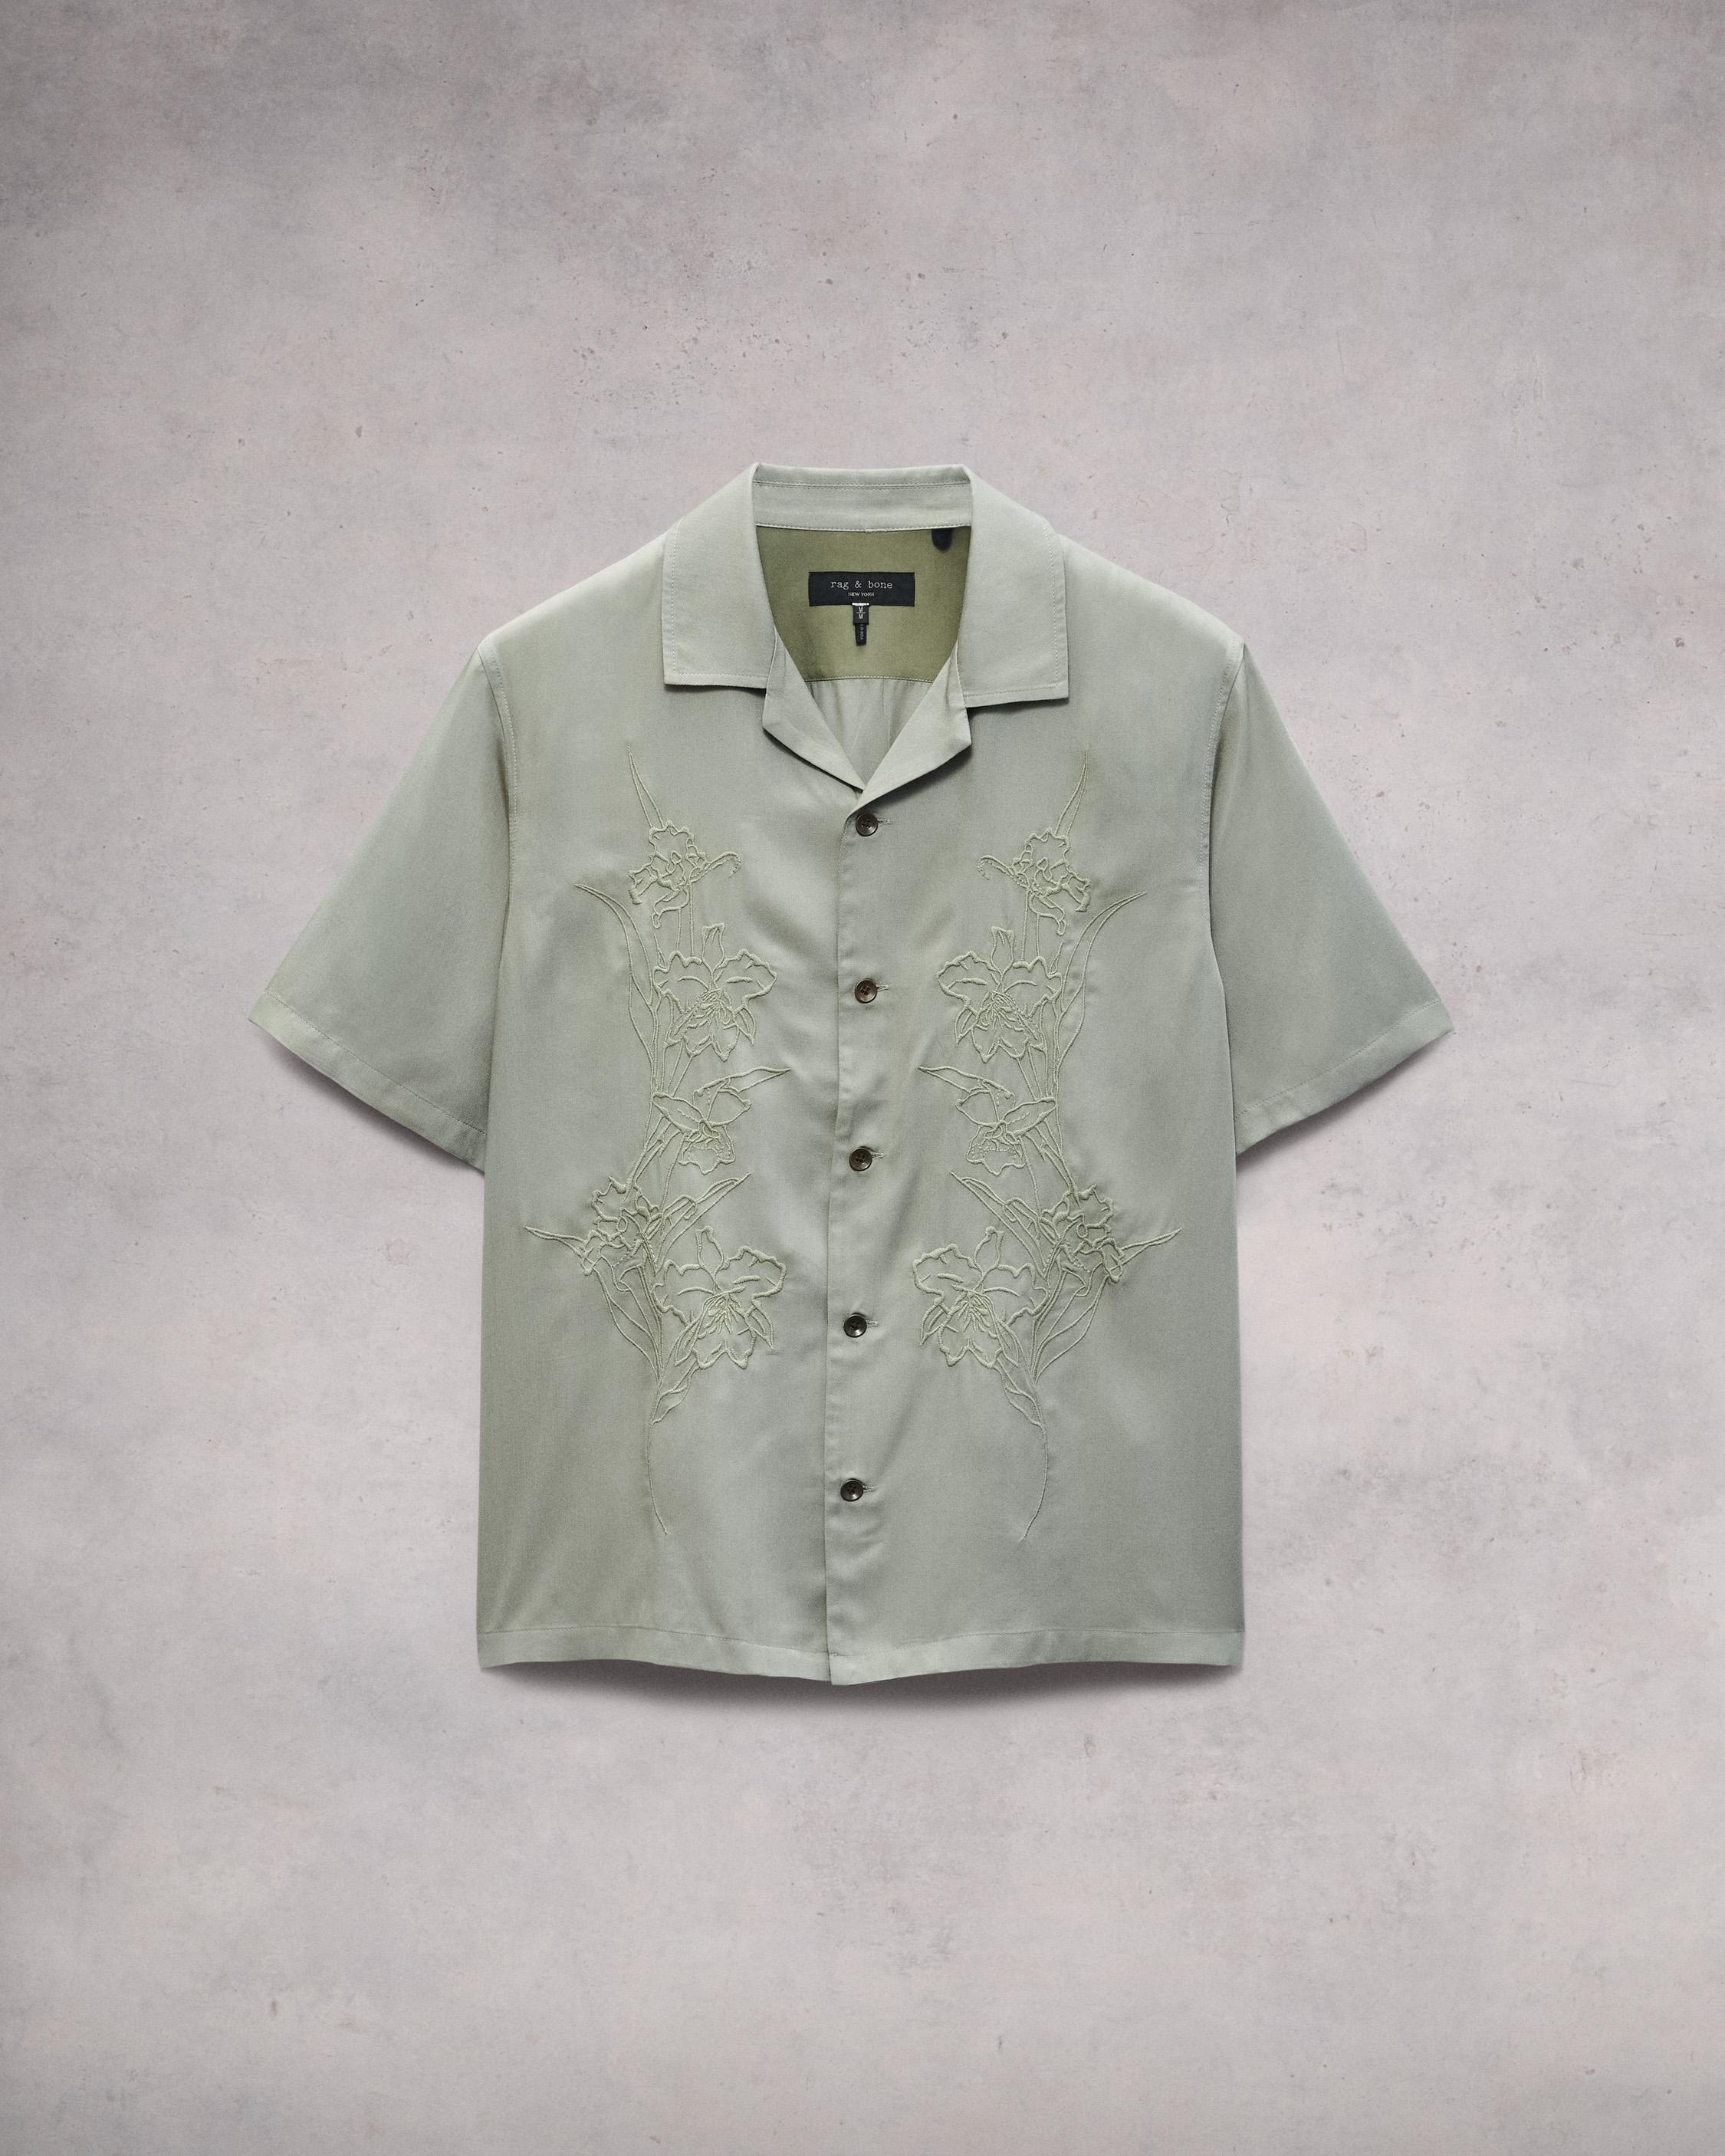 Avery Resort Embroidered Shirt
Relaxed Fit Button Down - 1